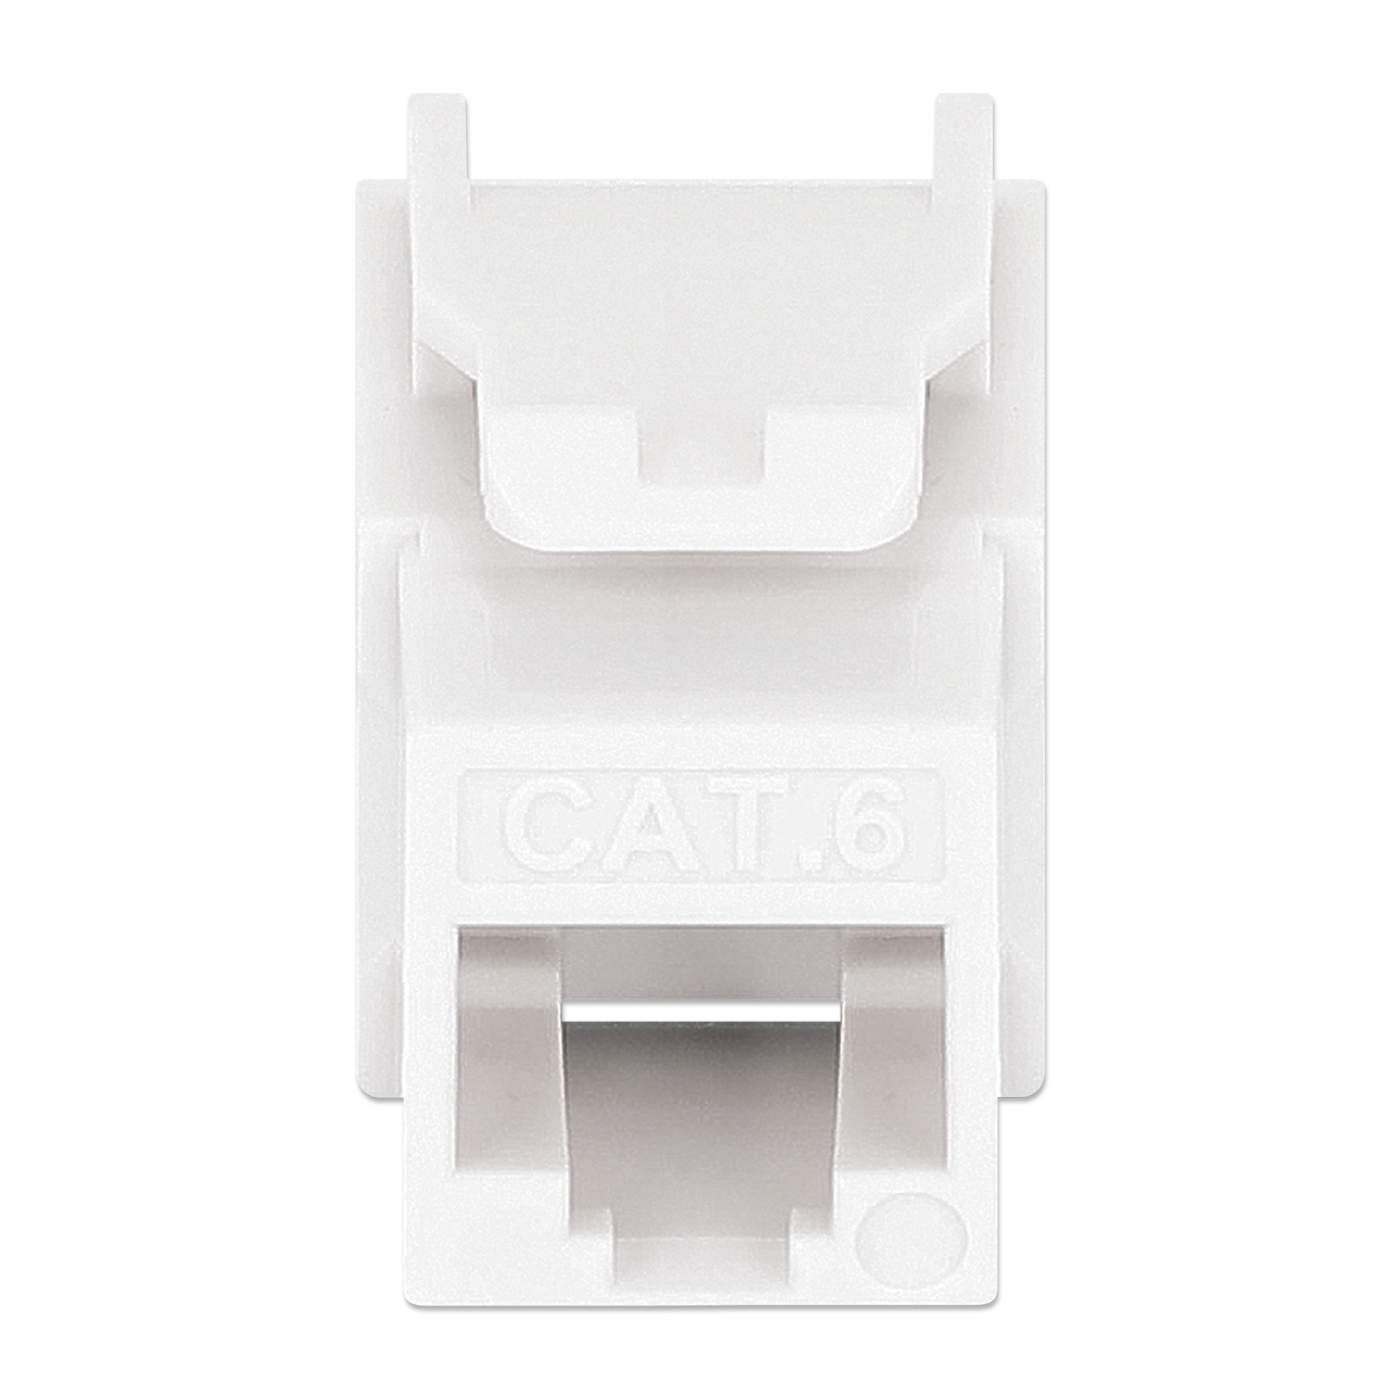 Cat6 Slim Keystone Jack with Punch-Down Stand, White, 25-Pack Image 4